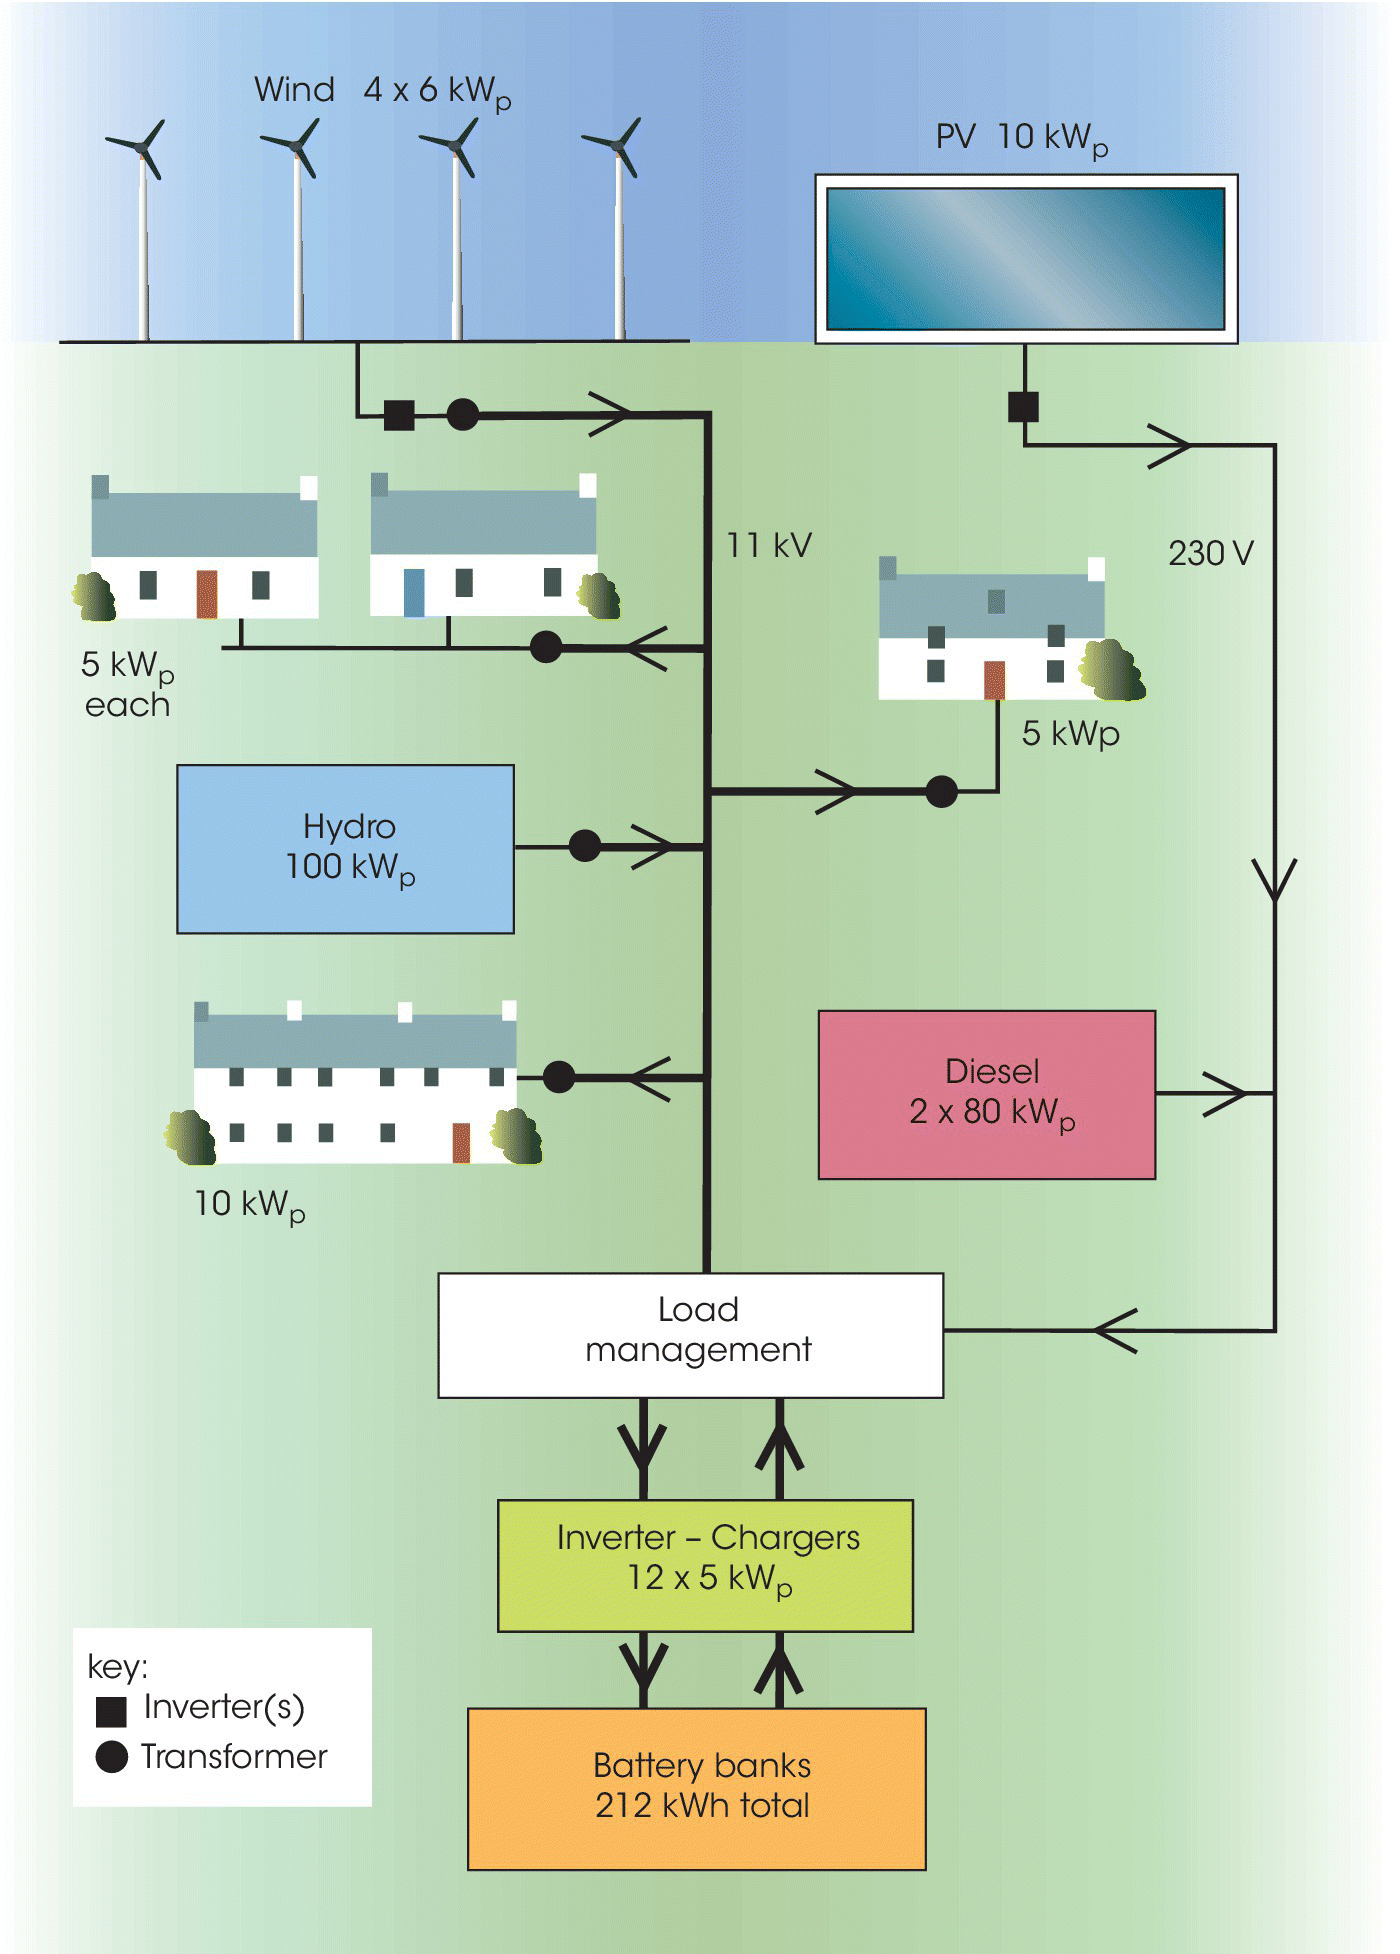 Schematic of the Isle of Eigg’s renewable energy system, displaying a connection of 4 wind turbines, a PV module, 4 houses, and 5 boxes labeled Hydro, Diesel, Load management, Inverter–Chargers, and Battery banks.